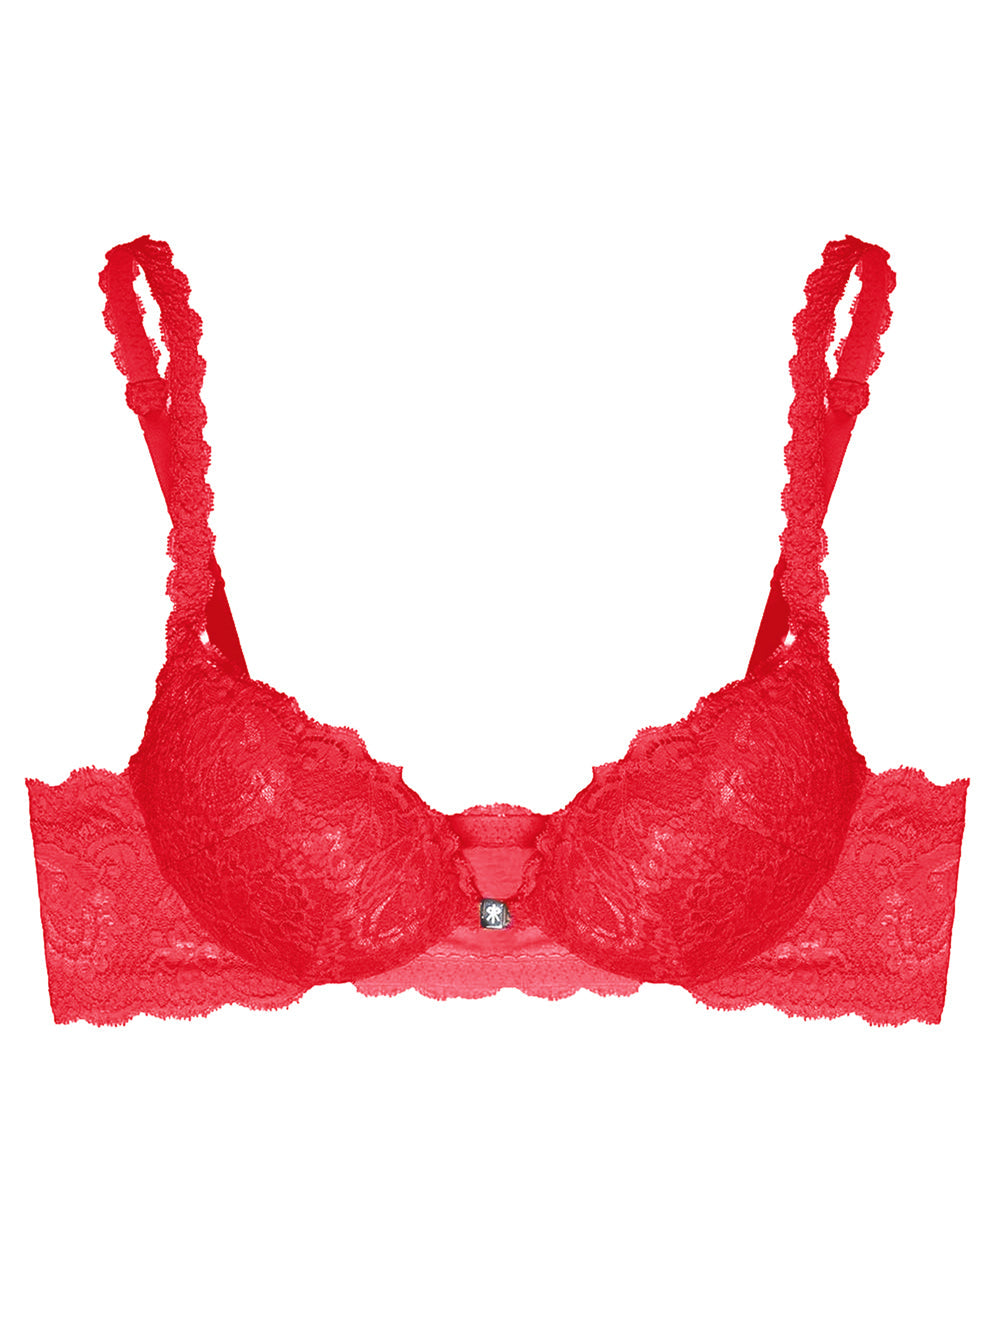 High Impact Underwire Double D Bra - Agate Red / dd / 34